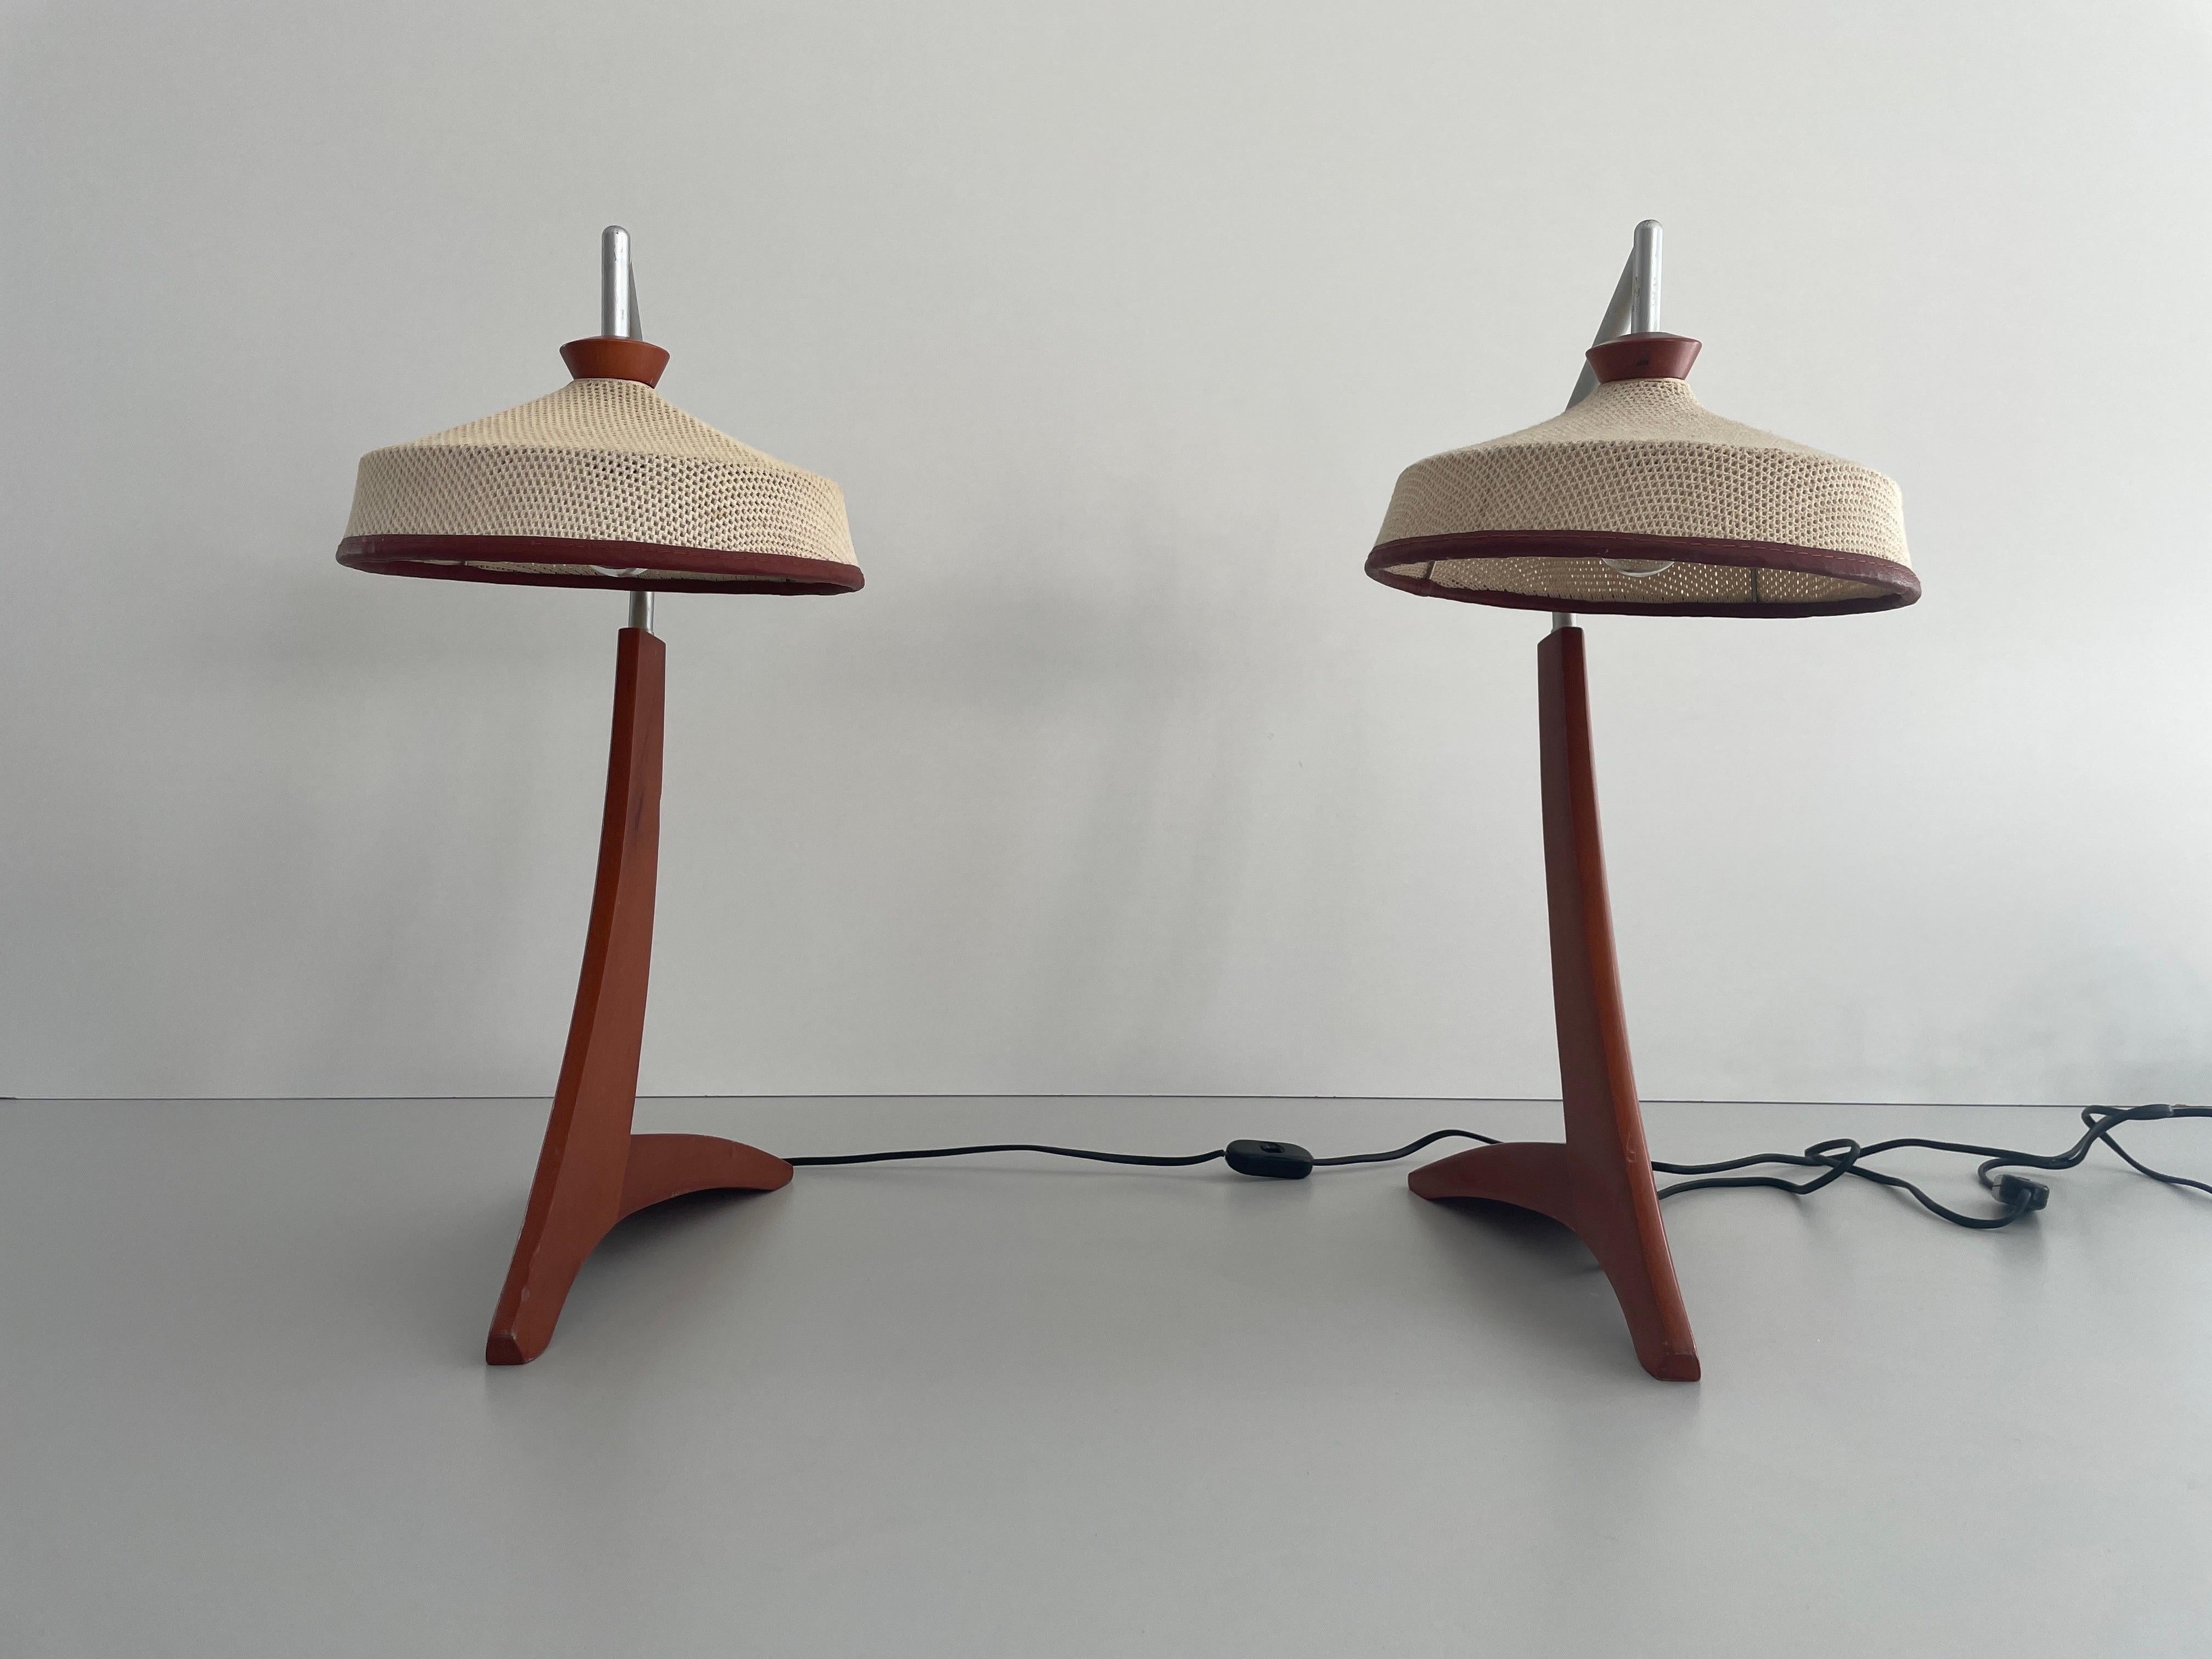 Mid-Century Modern  Wood and Woven Thread Shade Pair of Tall Table Lamps, 1960s, Italy